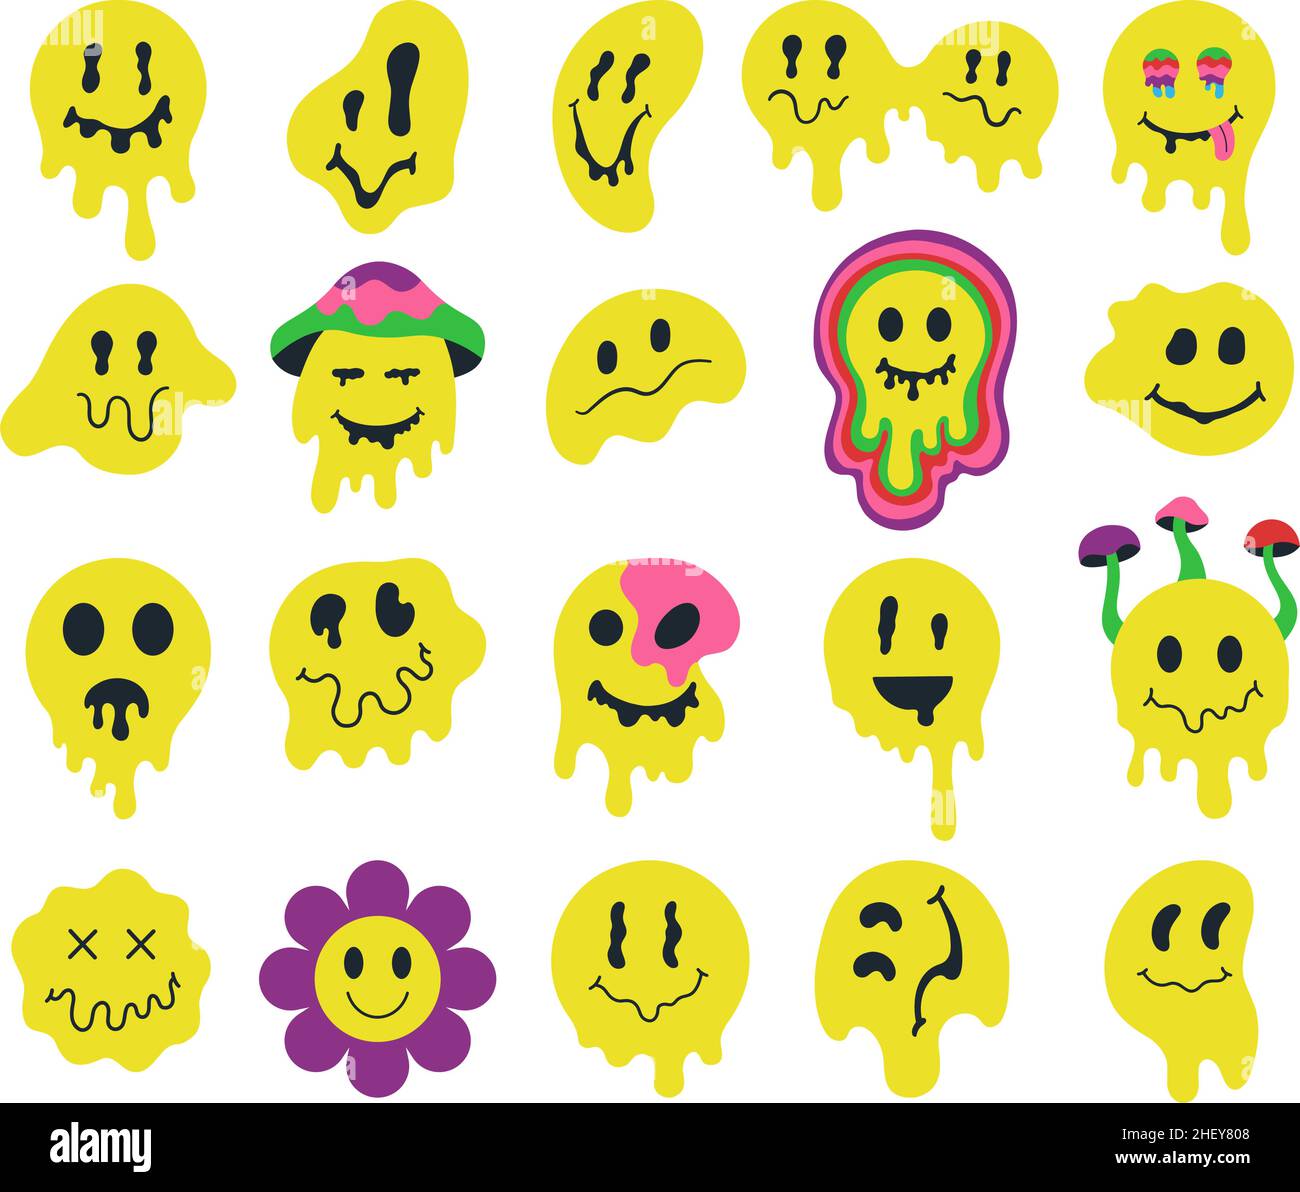 Melting psychedelic smiling faces, dripping groovy characters. Crazy graffiti smile emoji, facial expressions mascots vector illustration set Stock Vector